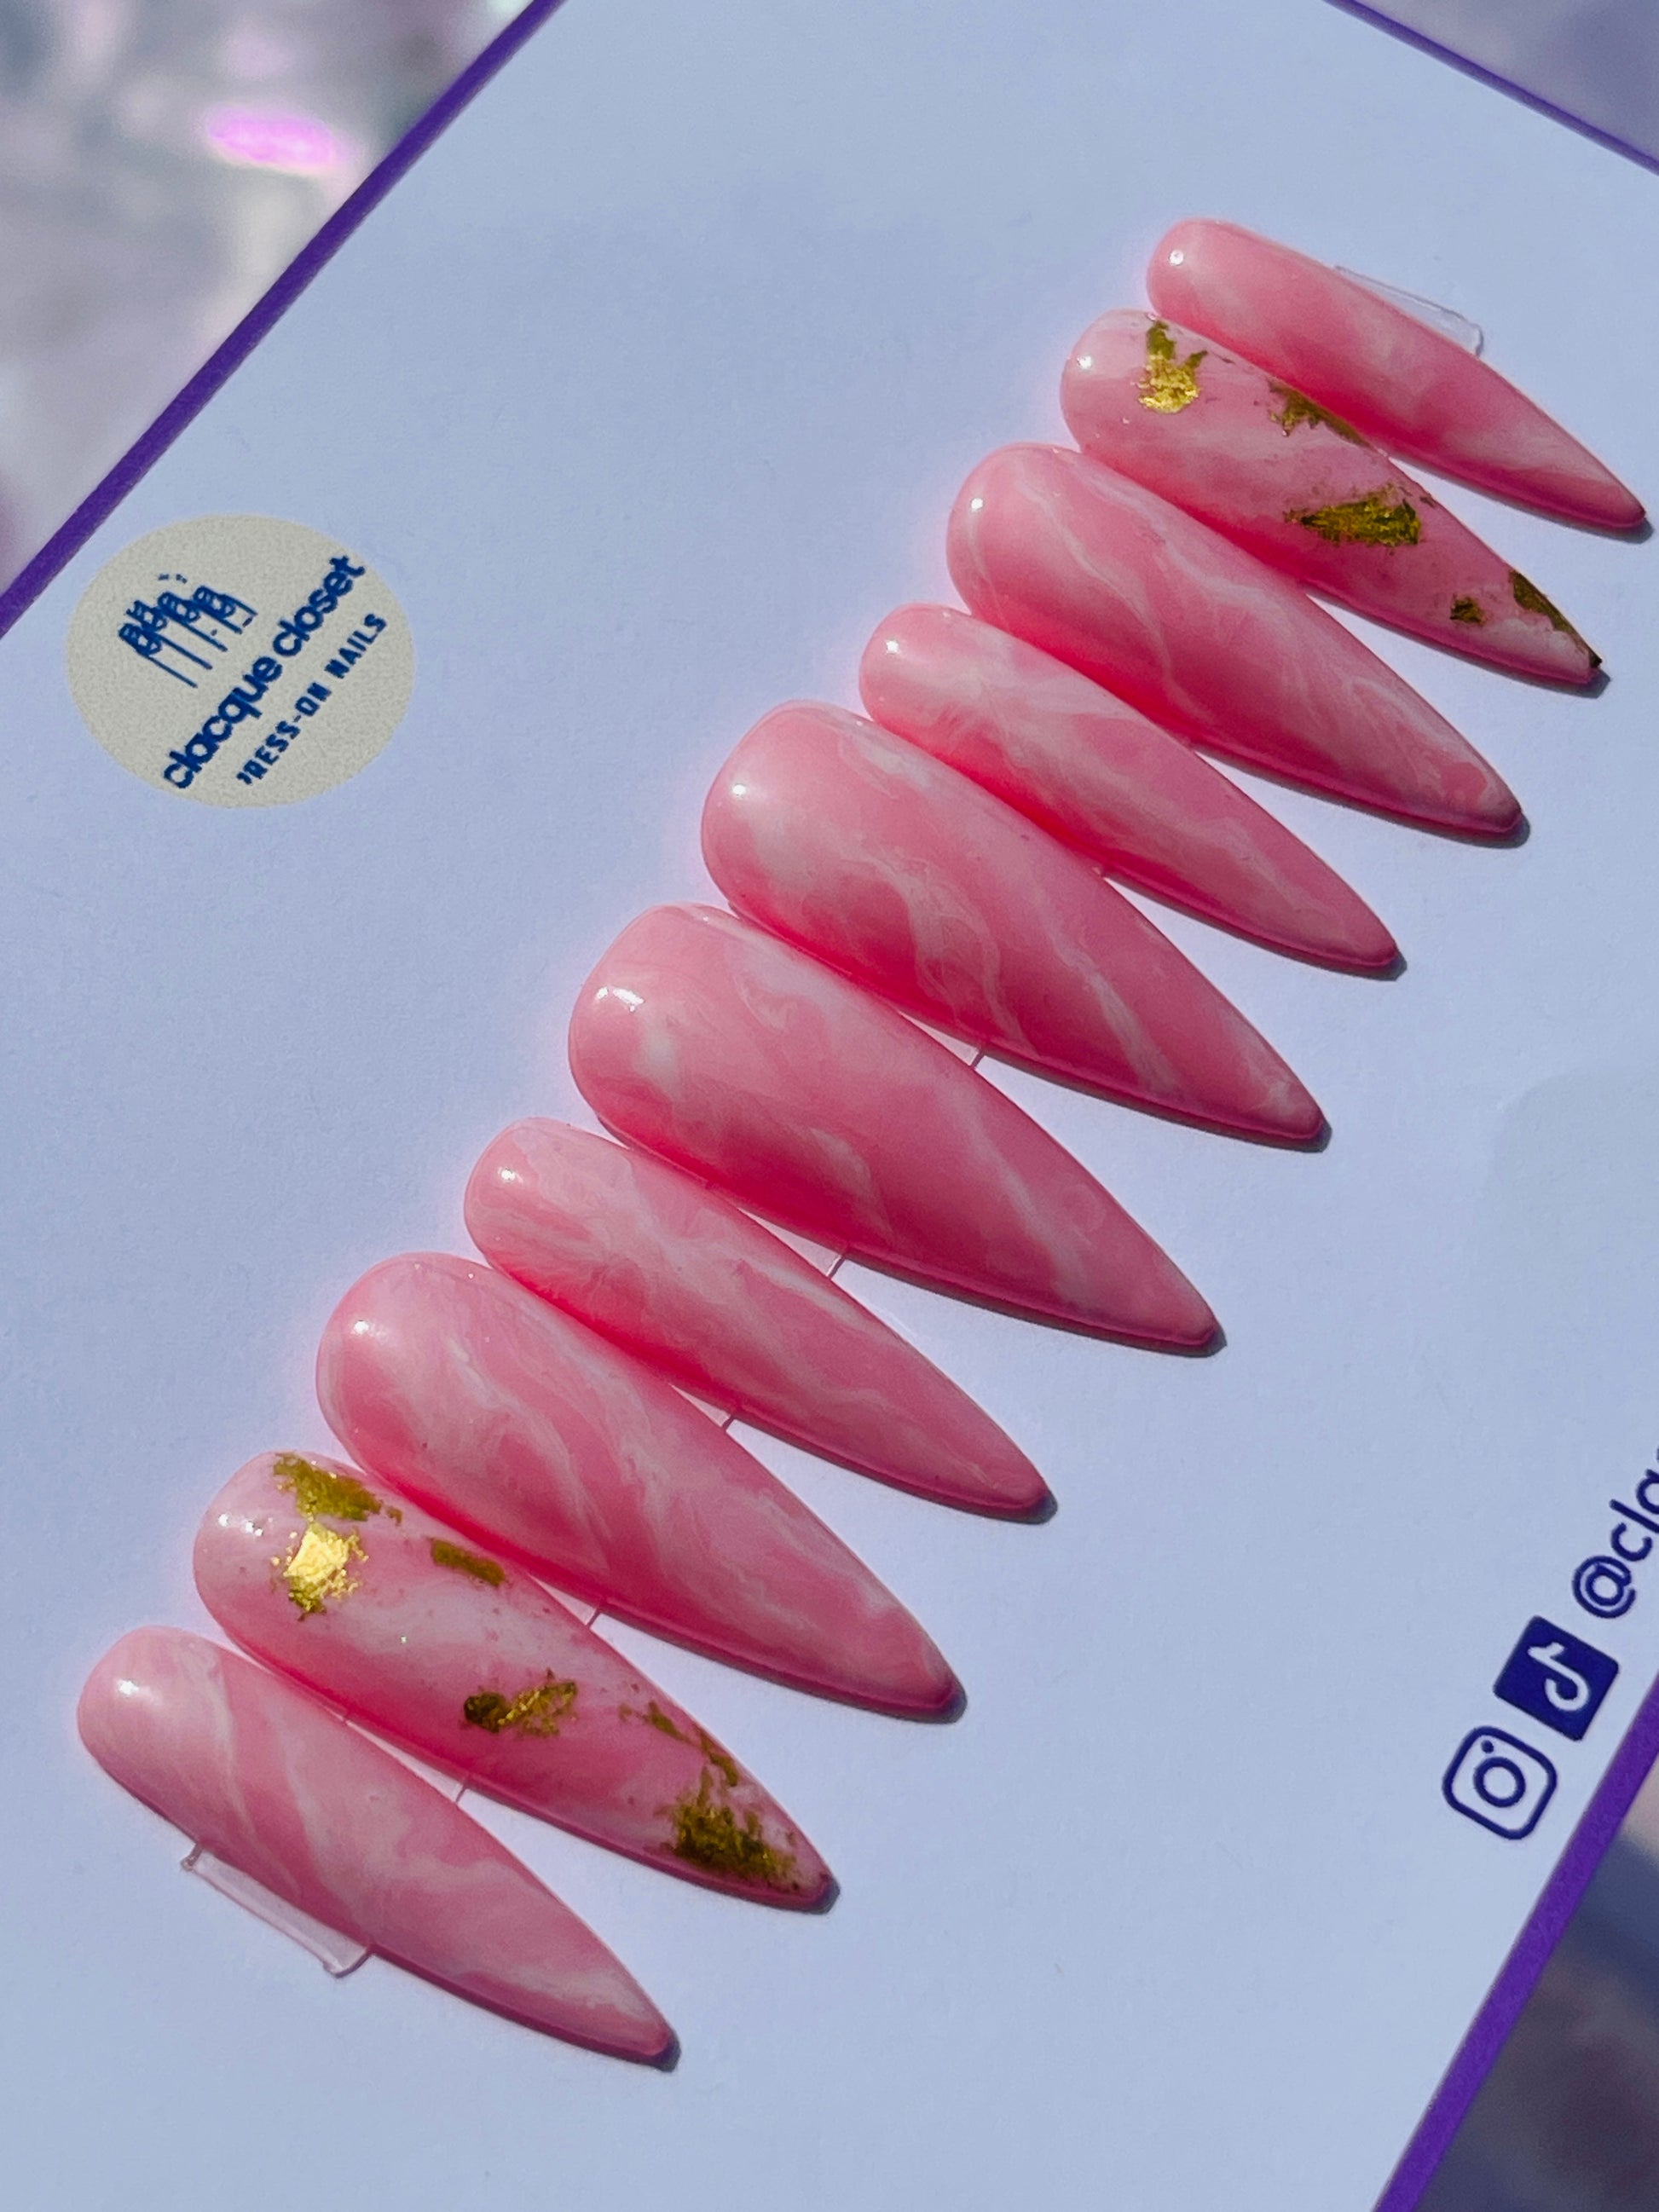 Long stiletto nails designed to resemble the natural beauty of pink rose quartz, reflecting light for a soft and romantic effect.